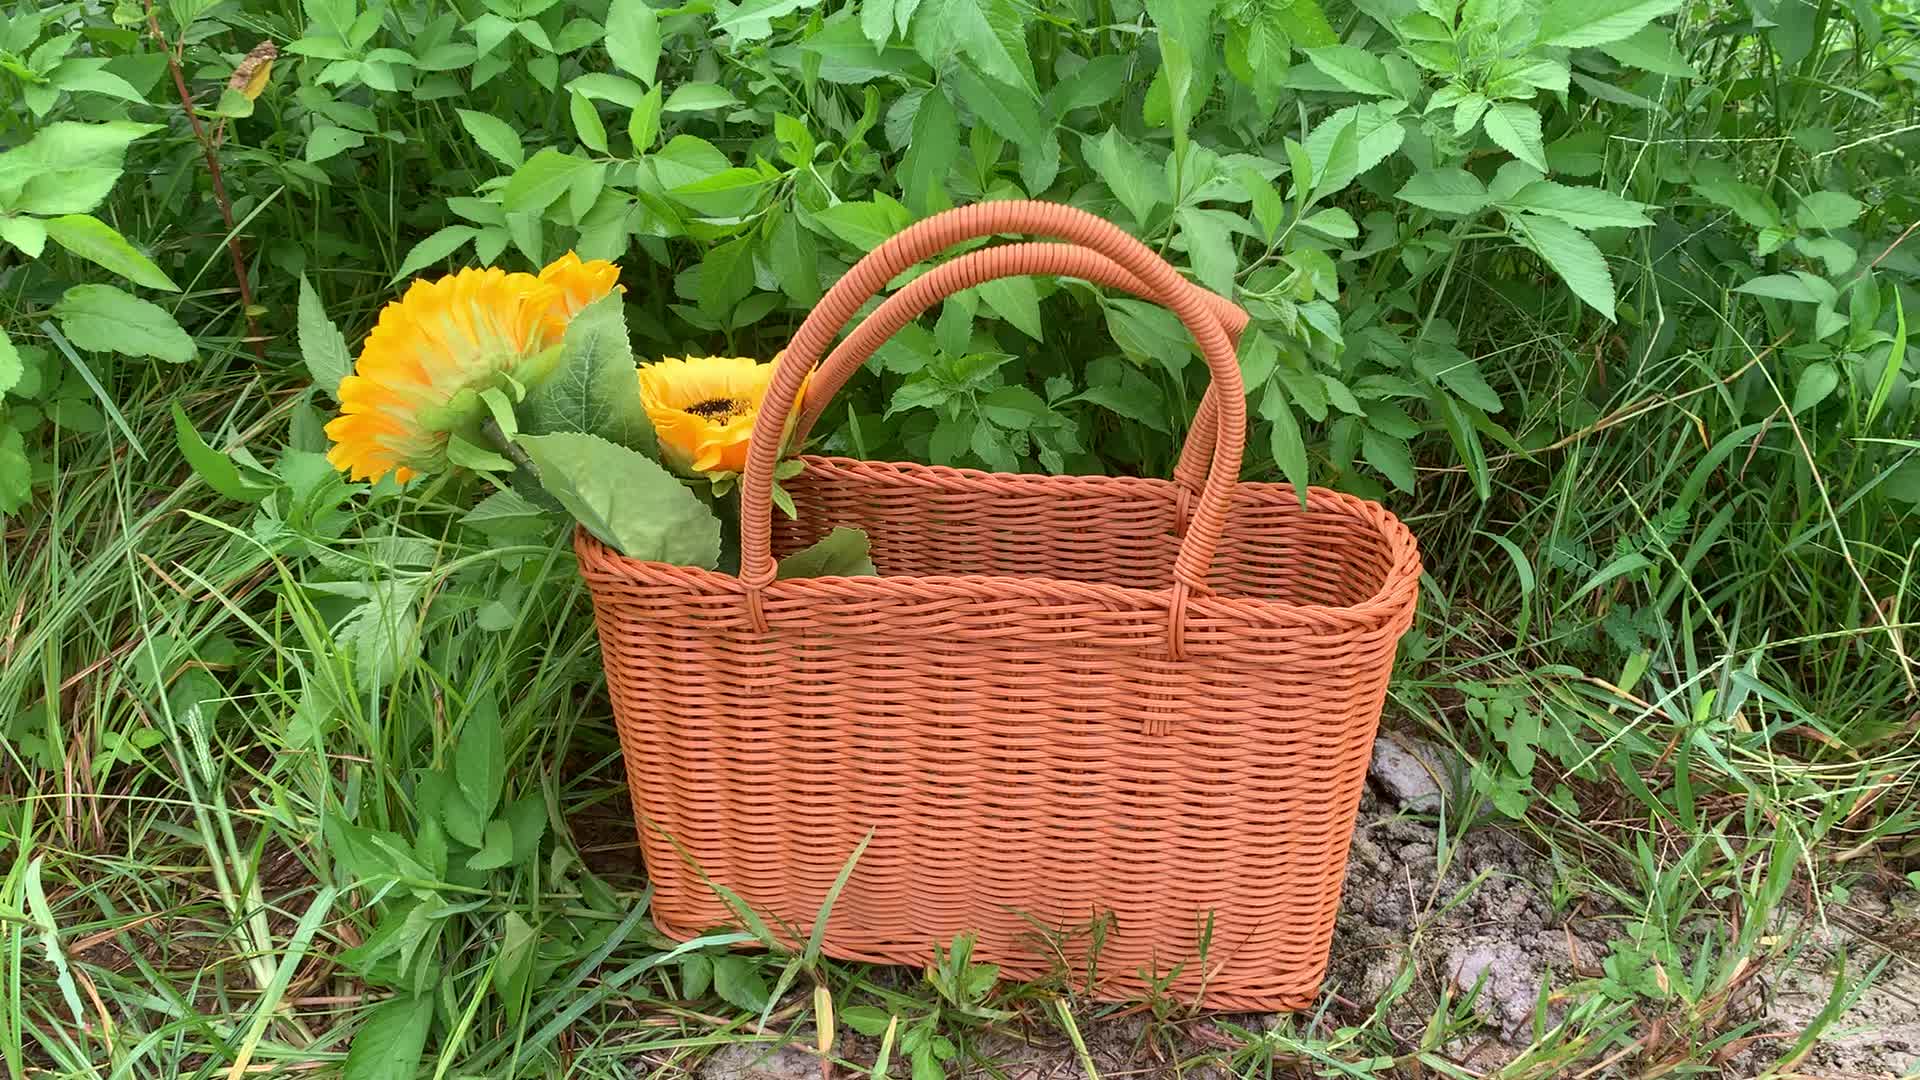 Handwoven Wicker Picnic Basket with Washable for Bread Fruits